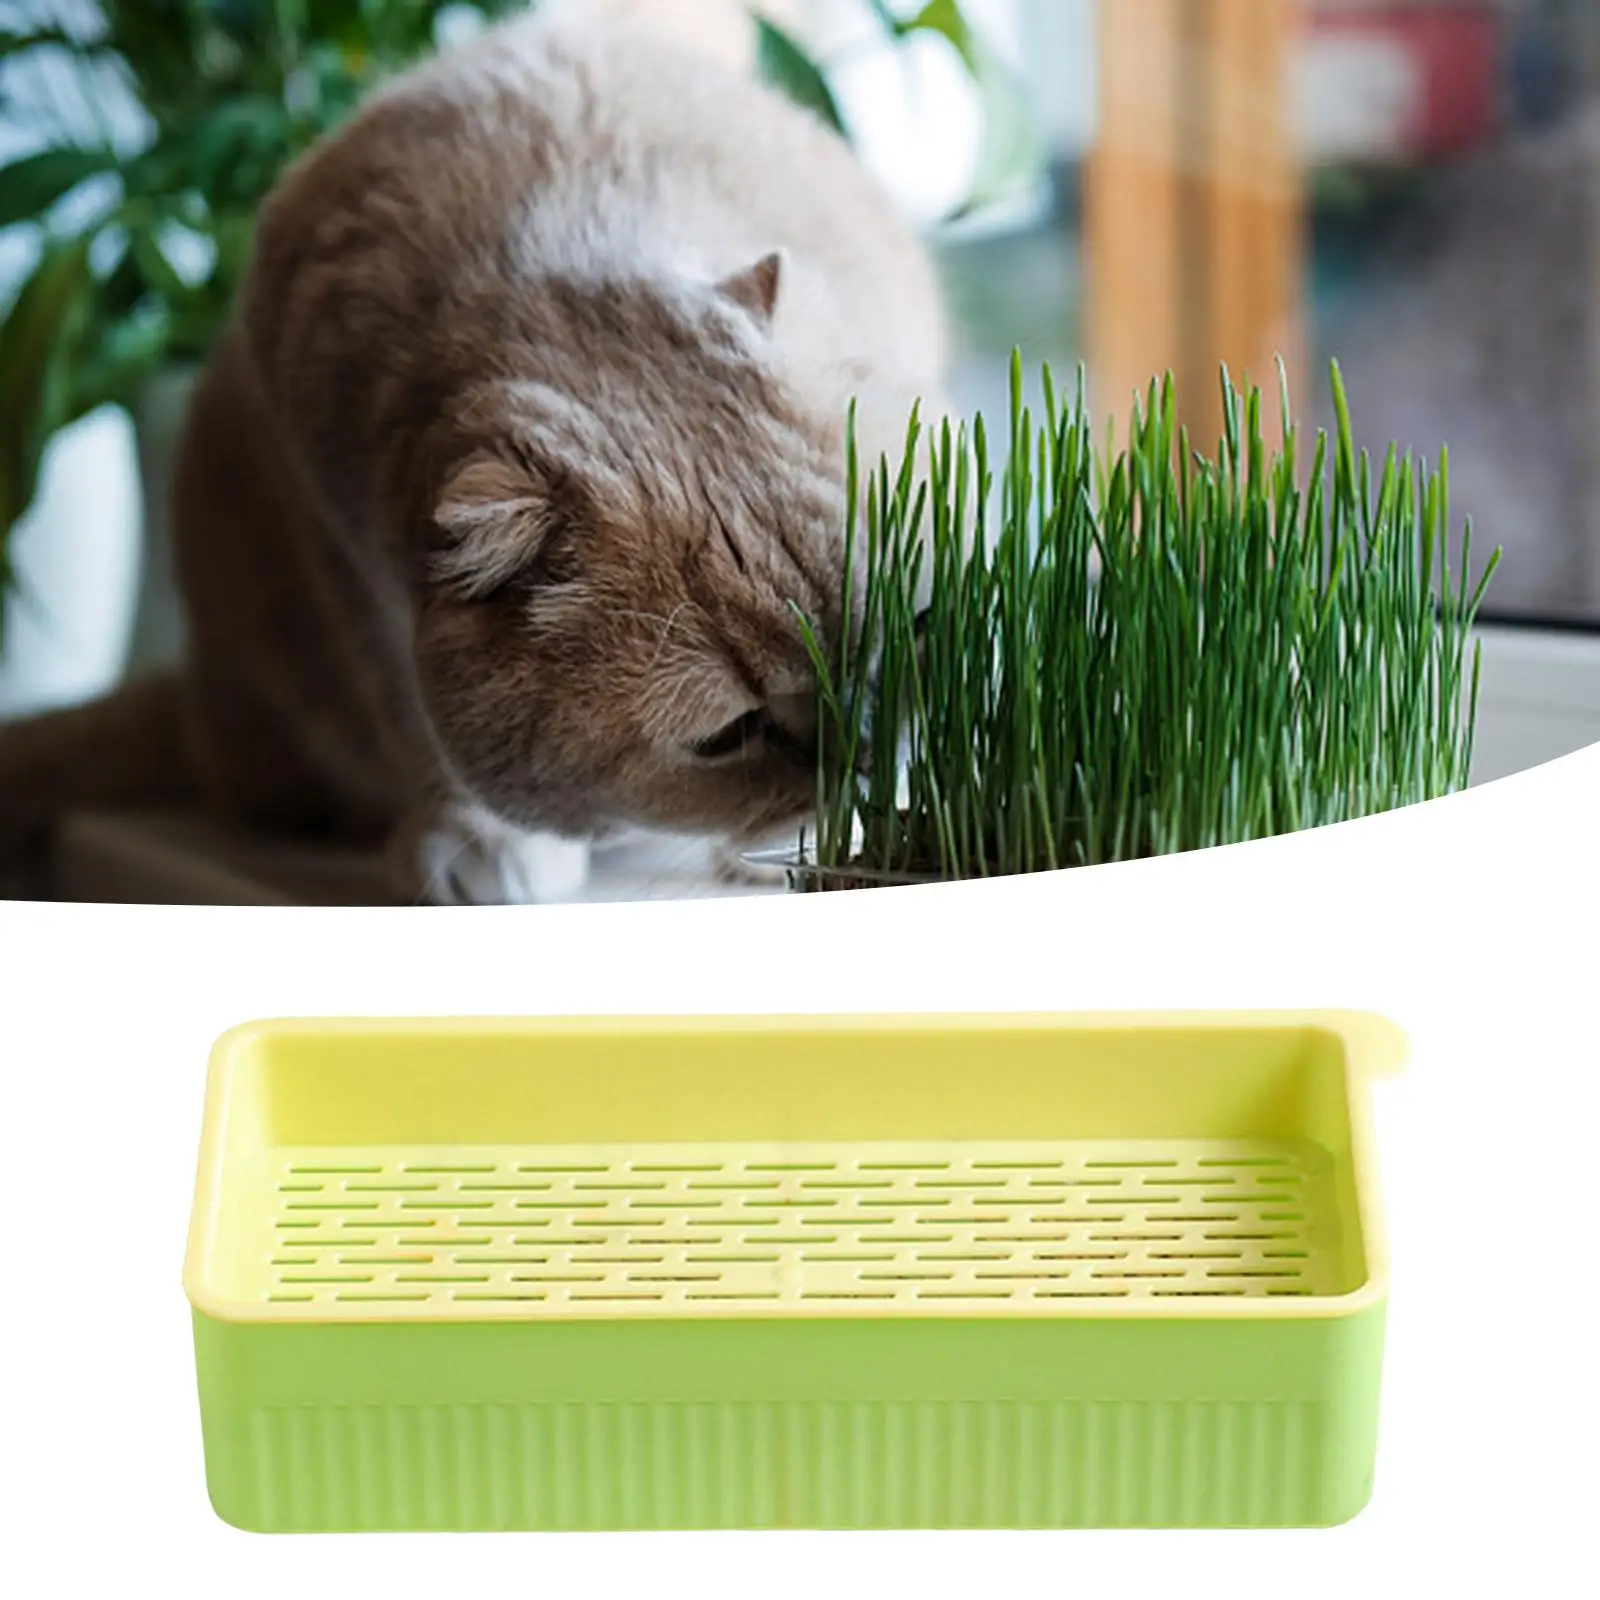 Seed Sprouter Tray Seed Starting Plant Cat Snack Tray Soil Free Cats Grass Hydroponic Box for Microgreens Seedling Planting Home